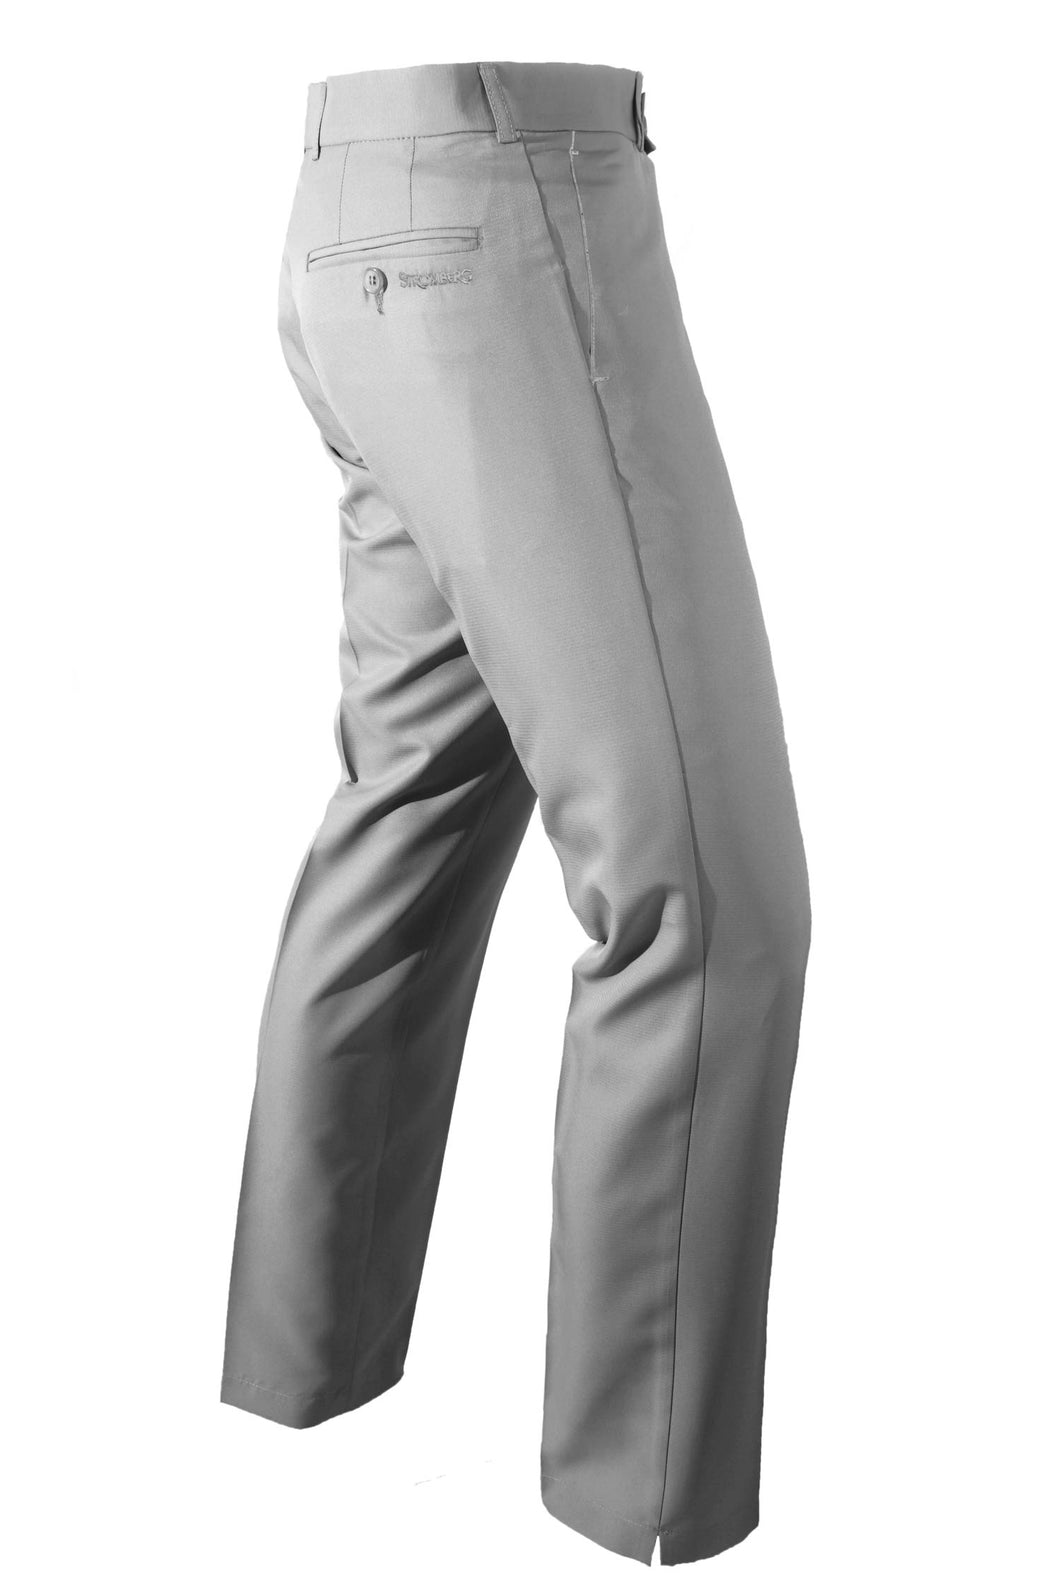 Sintra 2.2 - Light Grey Technical Golf Trouser - Tapered Fit